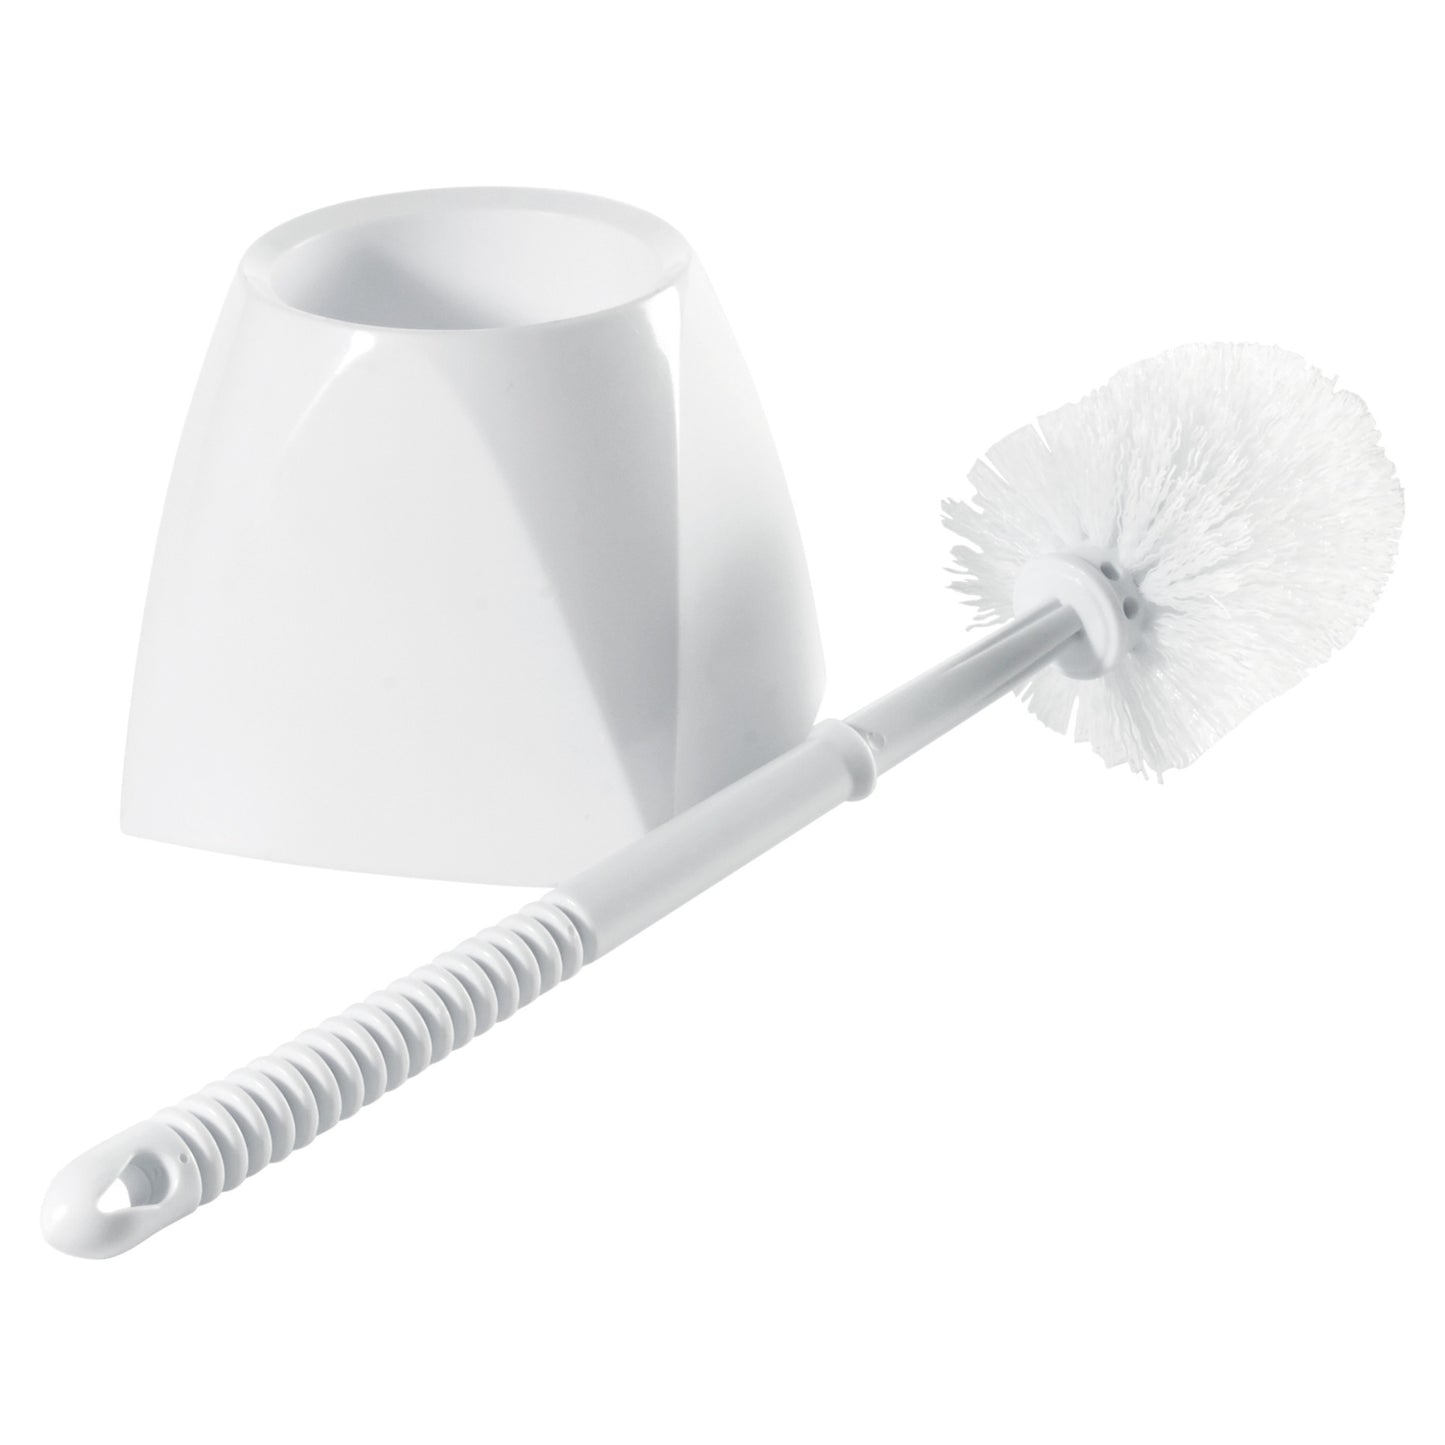 BR-15SET - Toilet Bowl Brush with Caddy